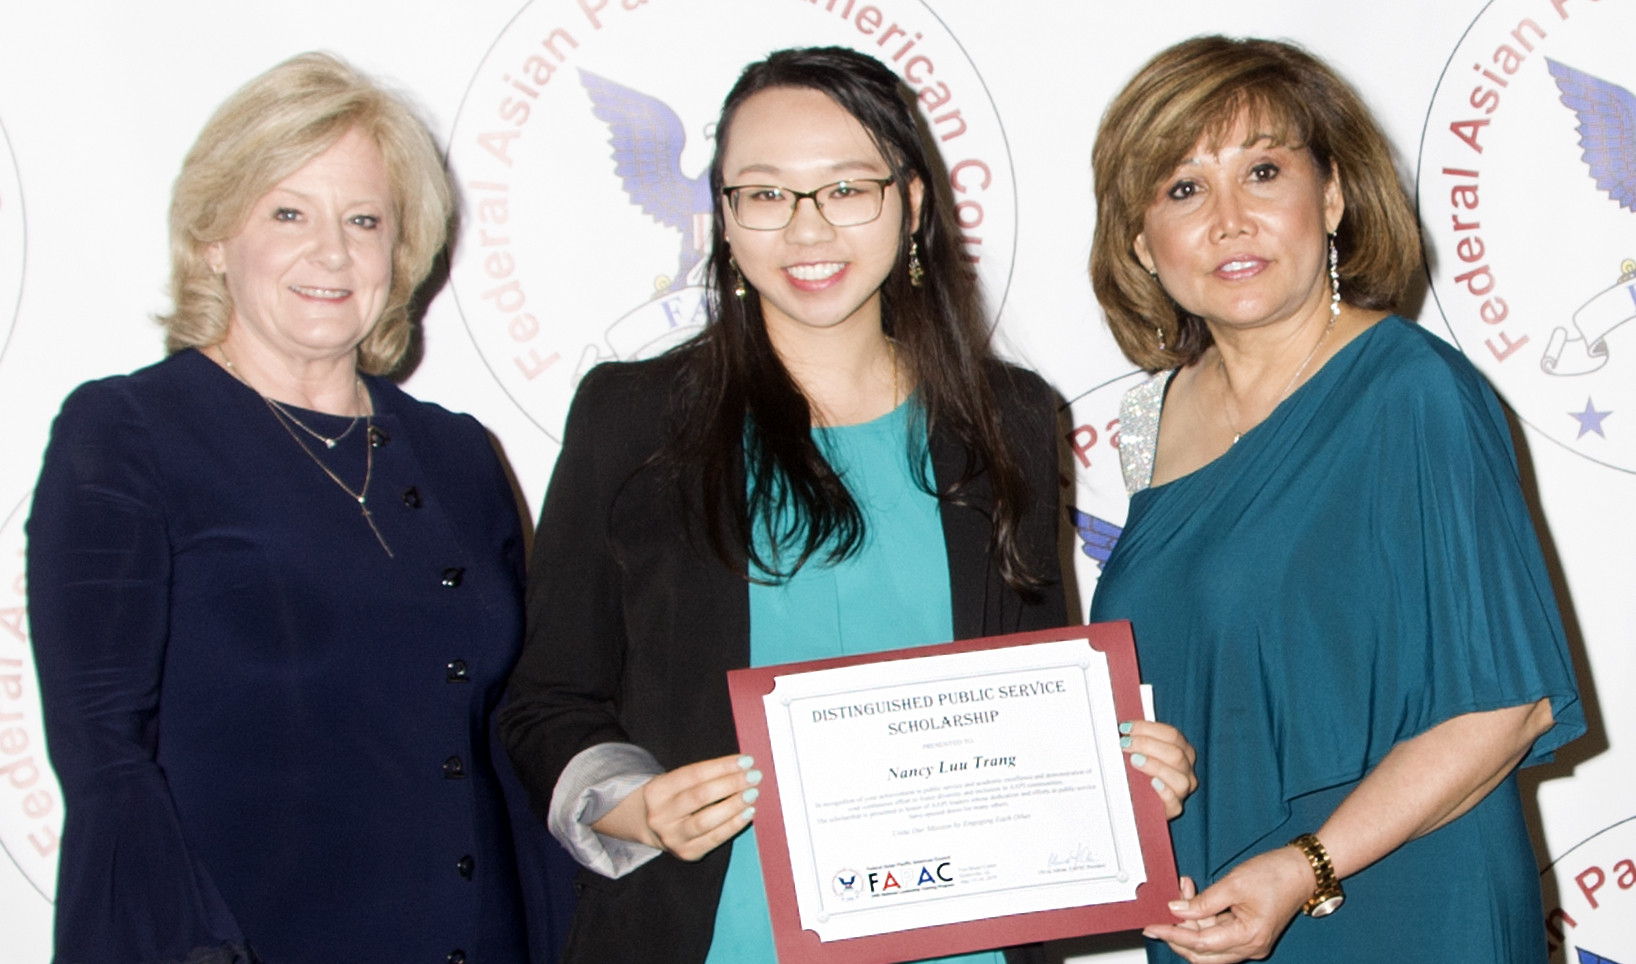 Nancy Trang (Center) with Marshall Space Flight Center Director Jody Singer (left) and FAPAC President Olivia Adrian (right)